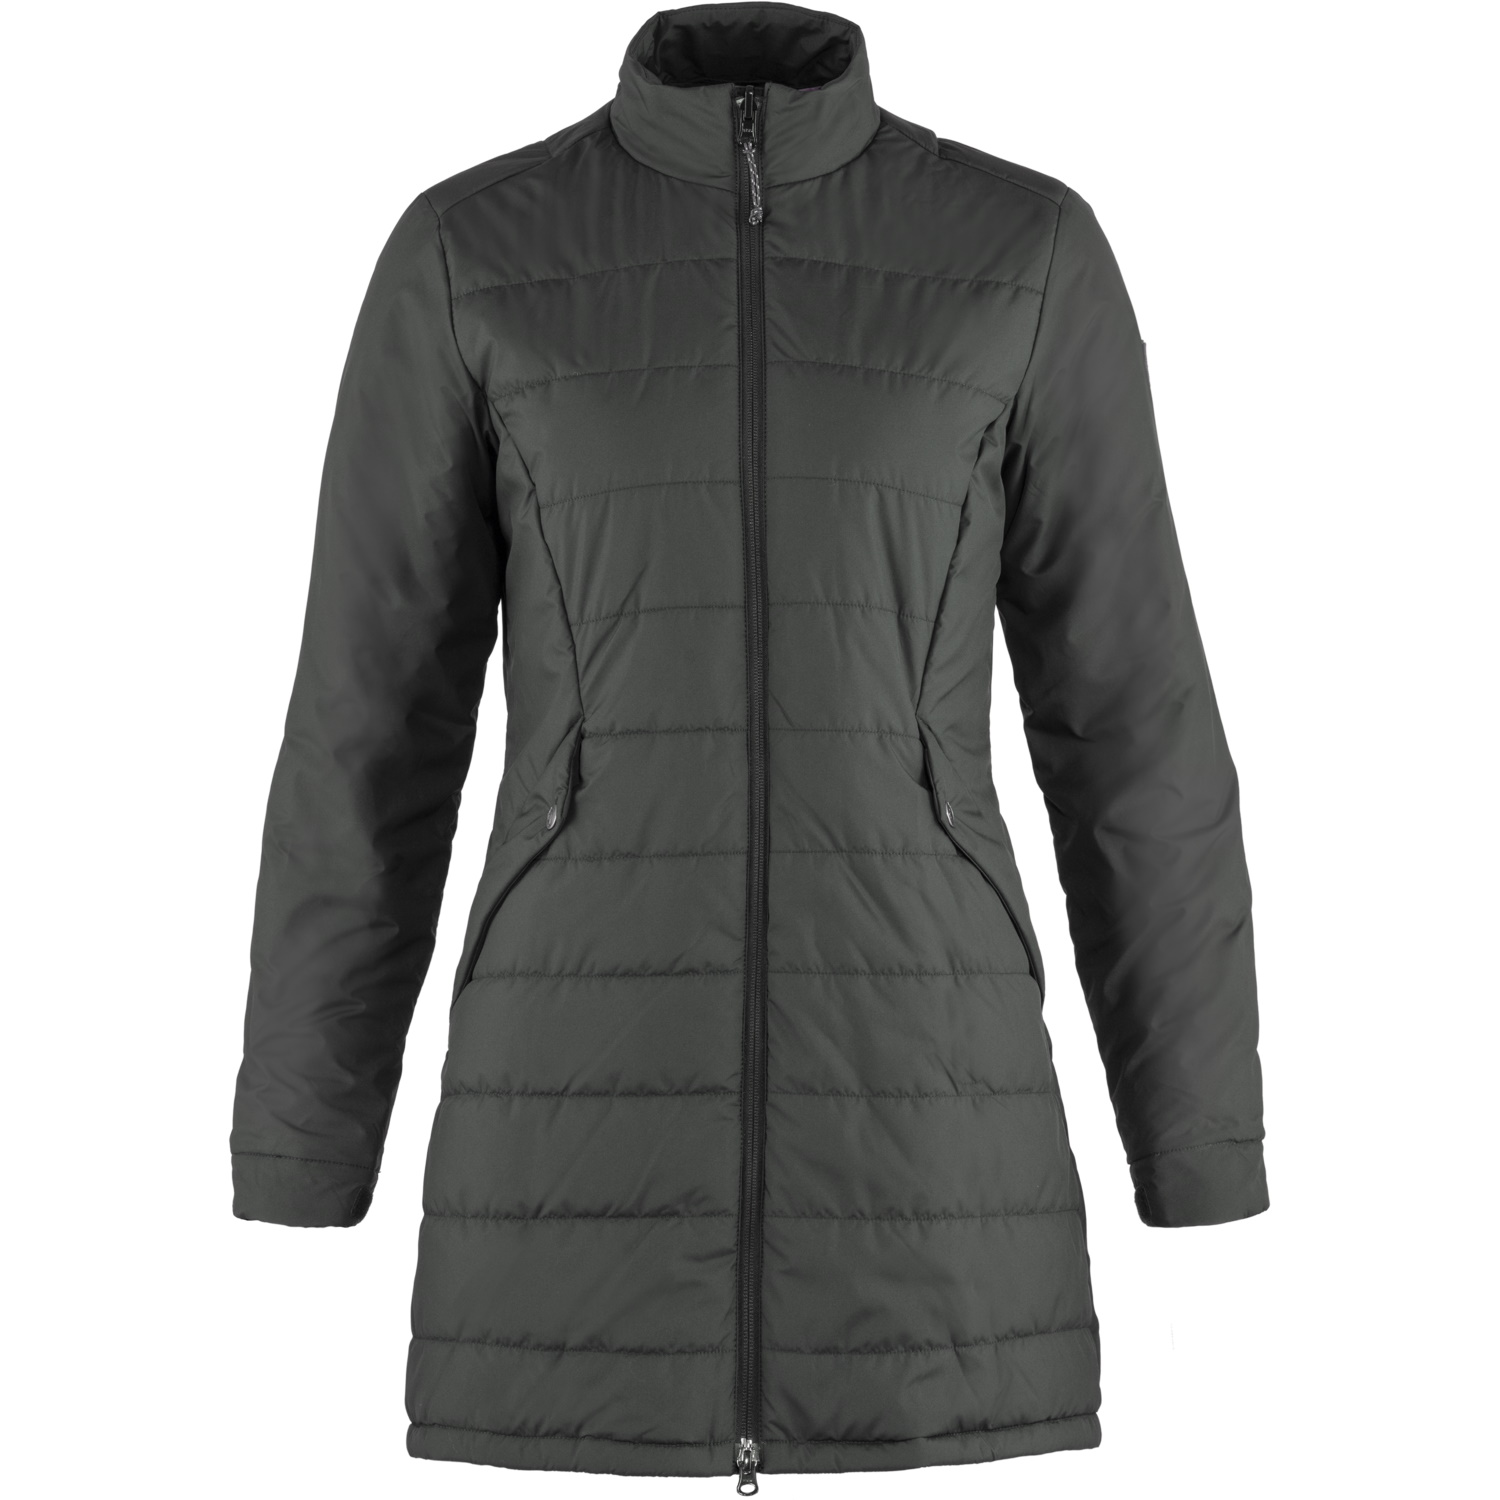 Women's Visby 3 in 1 Jacket Black | Buy Women's Visby 3 in 1 Jacket Black  here | Outnorth